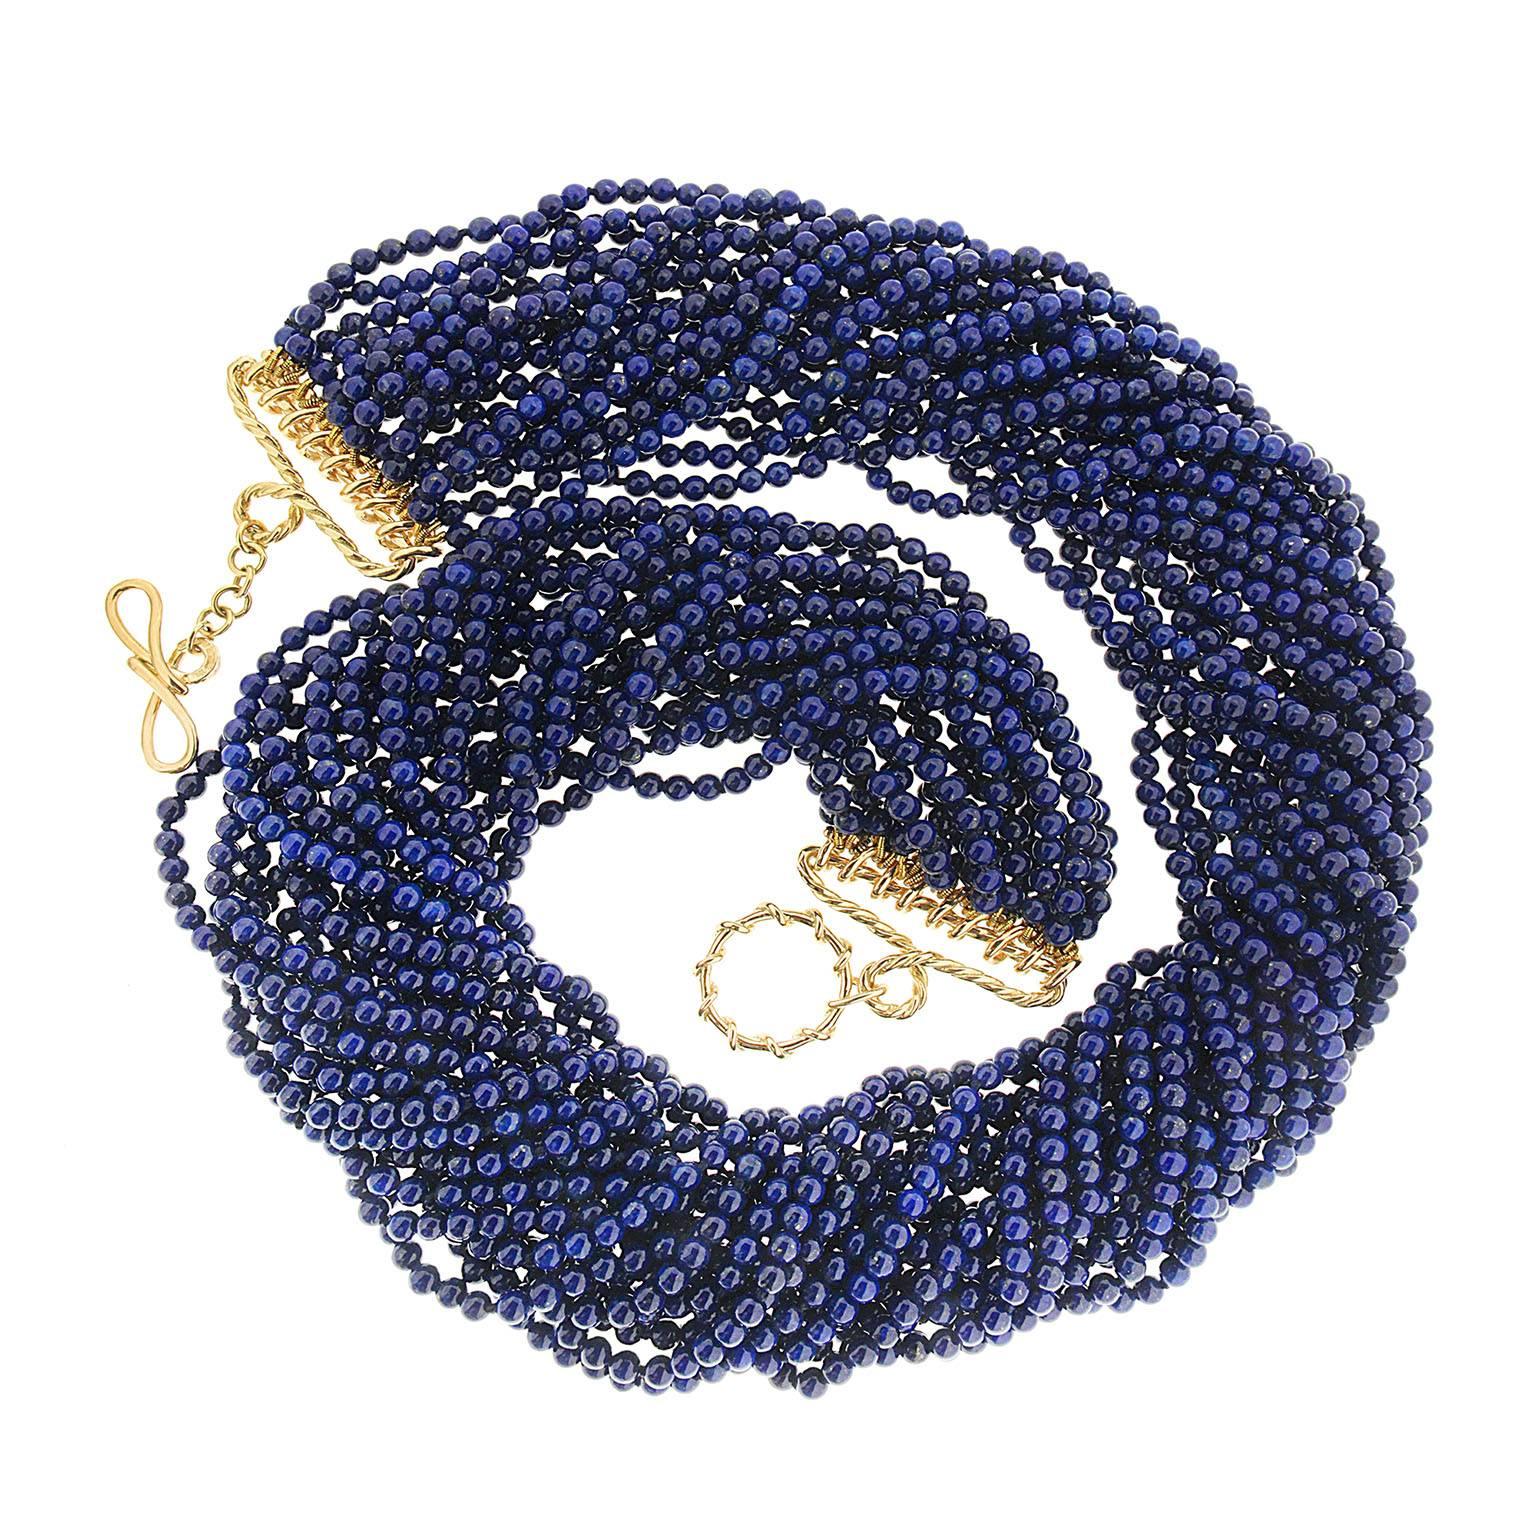 Valentin Magro Round Lapis Lazuli Multi Strands Necklace overflows with blue. The showcase gem is lapis lazuli, carved into countless 3.25mm beads. Together, they fill twenty strands. These individual lines twist together to form a torsade. A knot